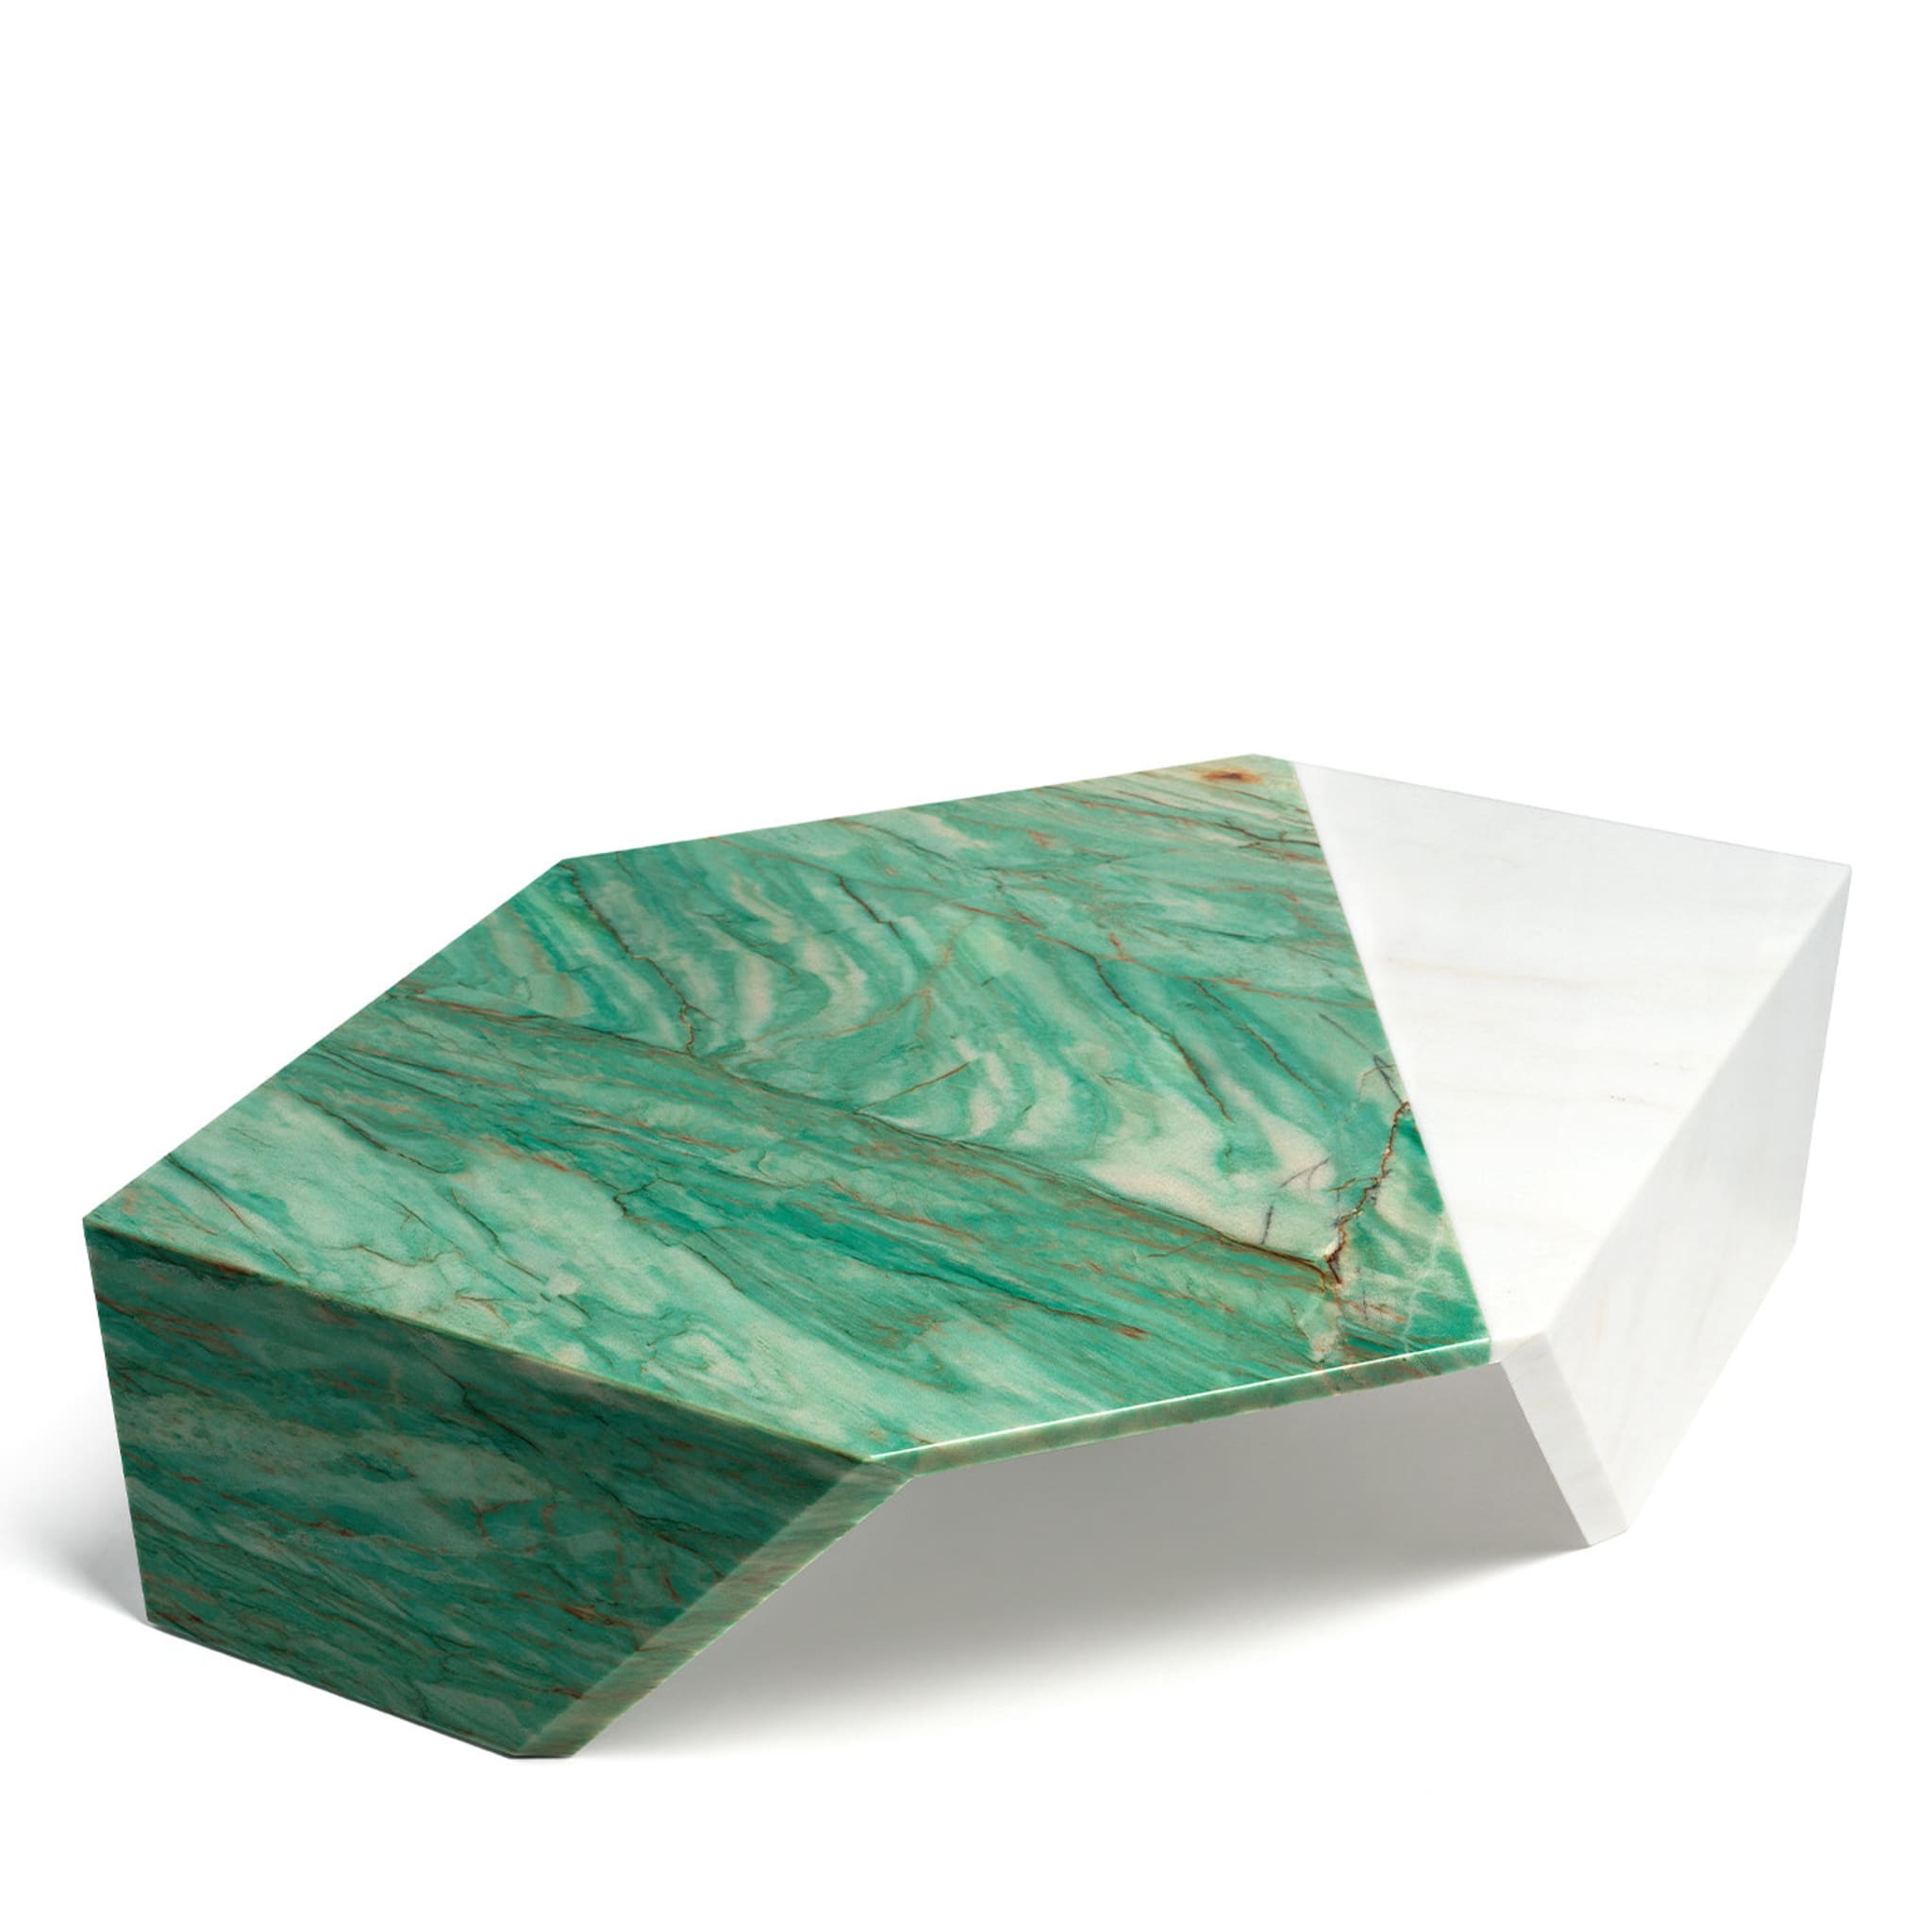 Green Origami Coffee Table by Patricia Urquiola - Alternative view 2